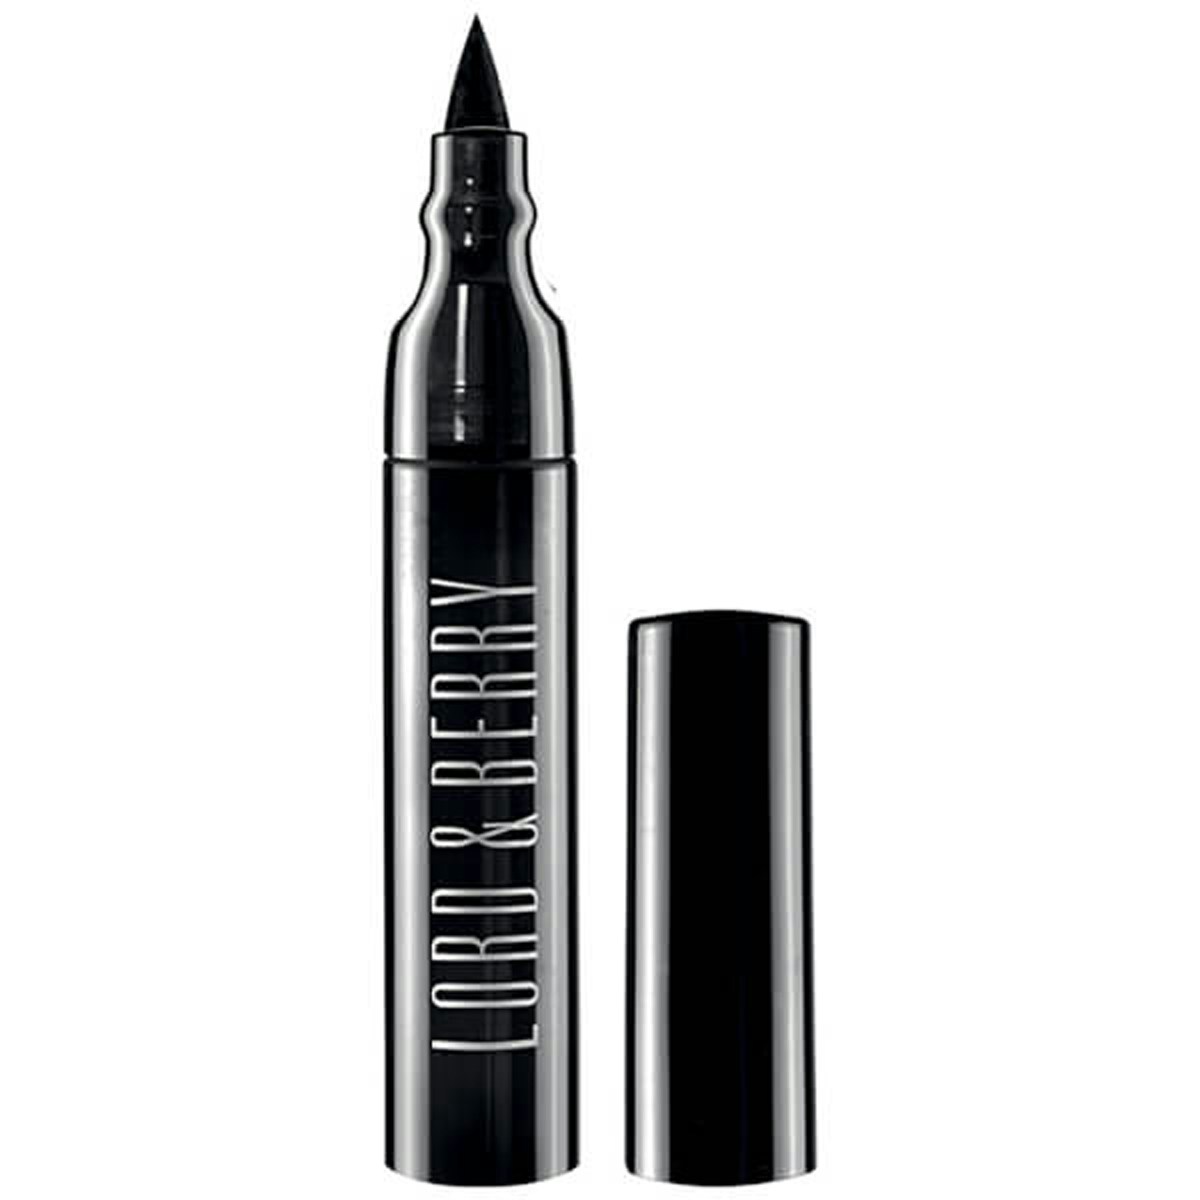 Lord & Berry Eyes Lord and Berry Black Wardrobe Perfecto Liner 2g Black